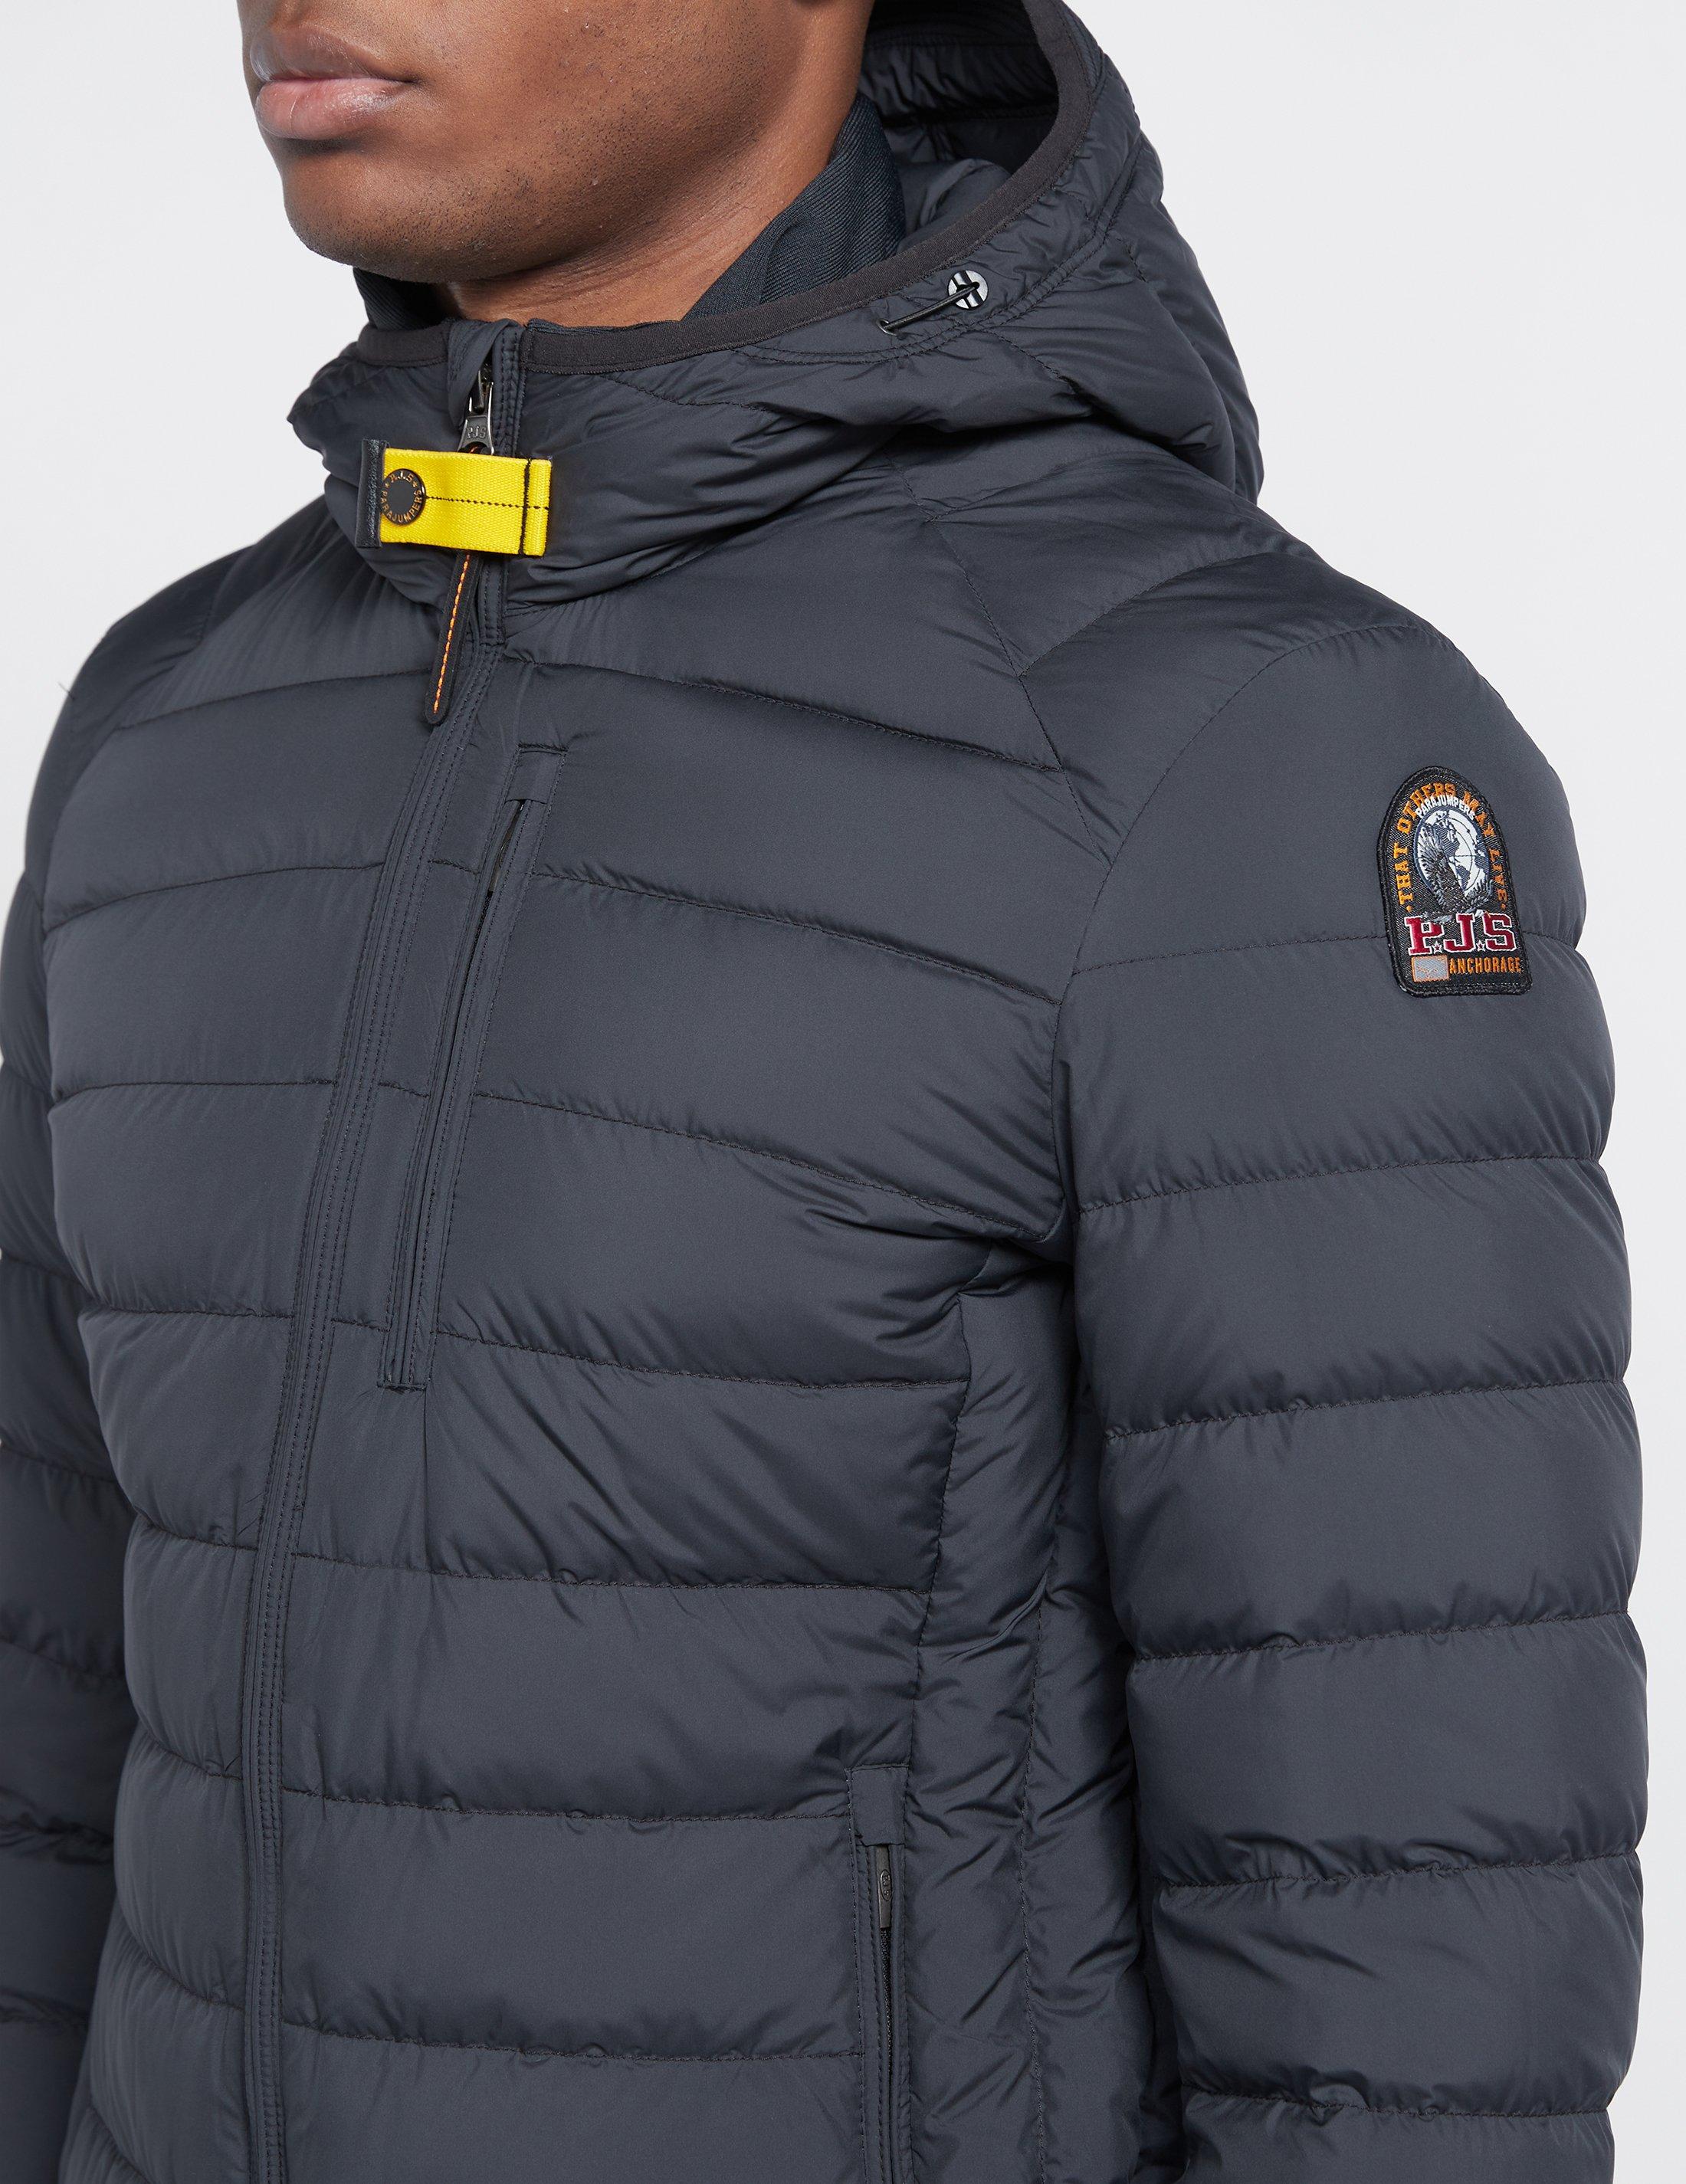 parajumpers last minute jacket review